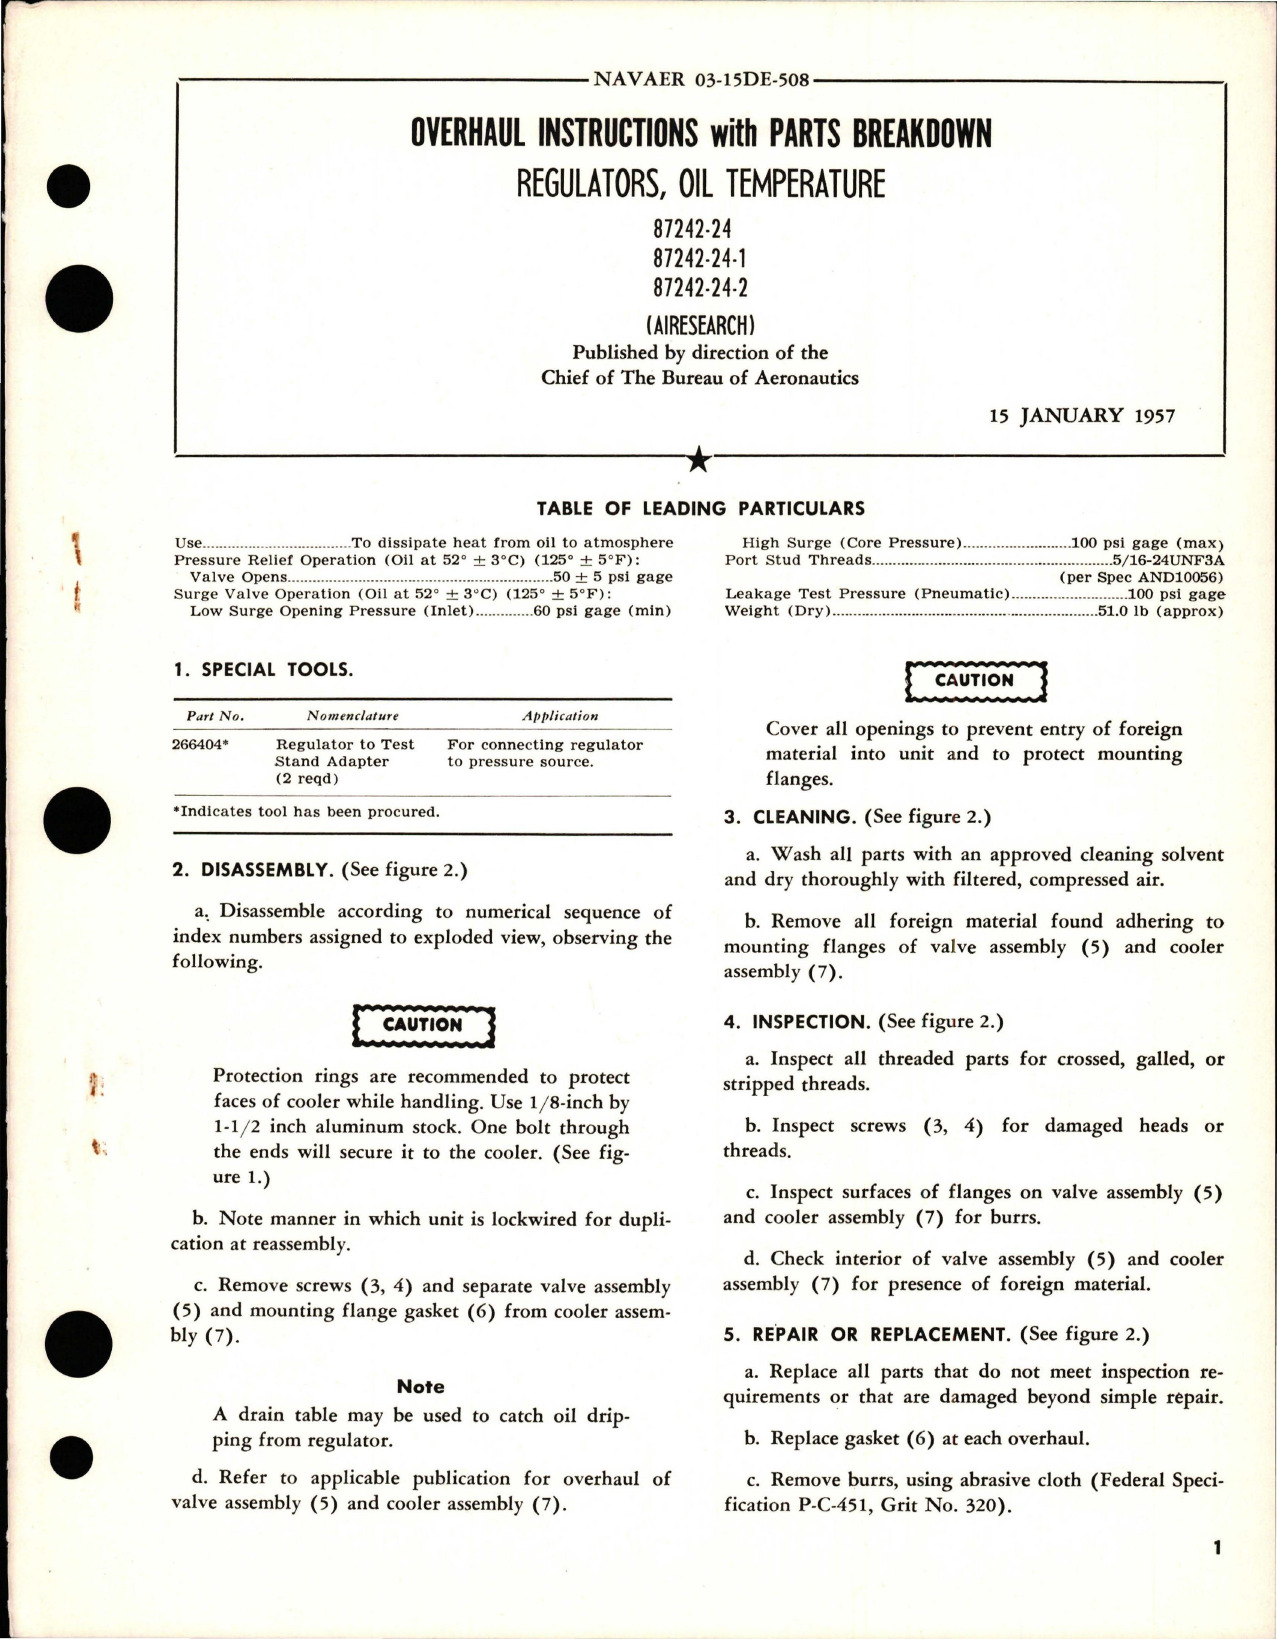 Sample page 1 from AirCorps Library document: Overhaul Instructions with Parts Breakdown for Oil Temperature Regulators - 87242-24, 87242-24-1, and 87242-24-2